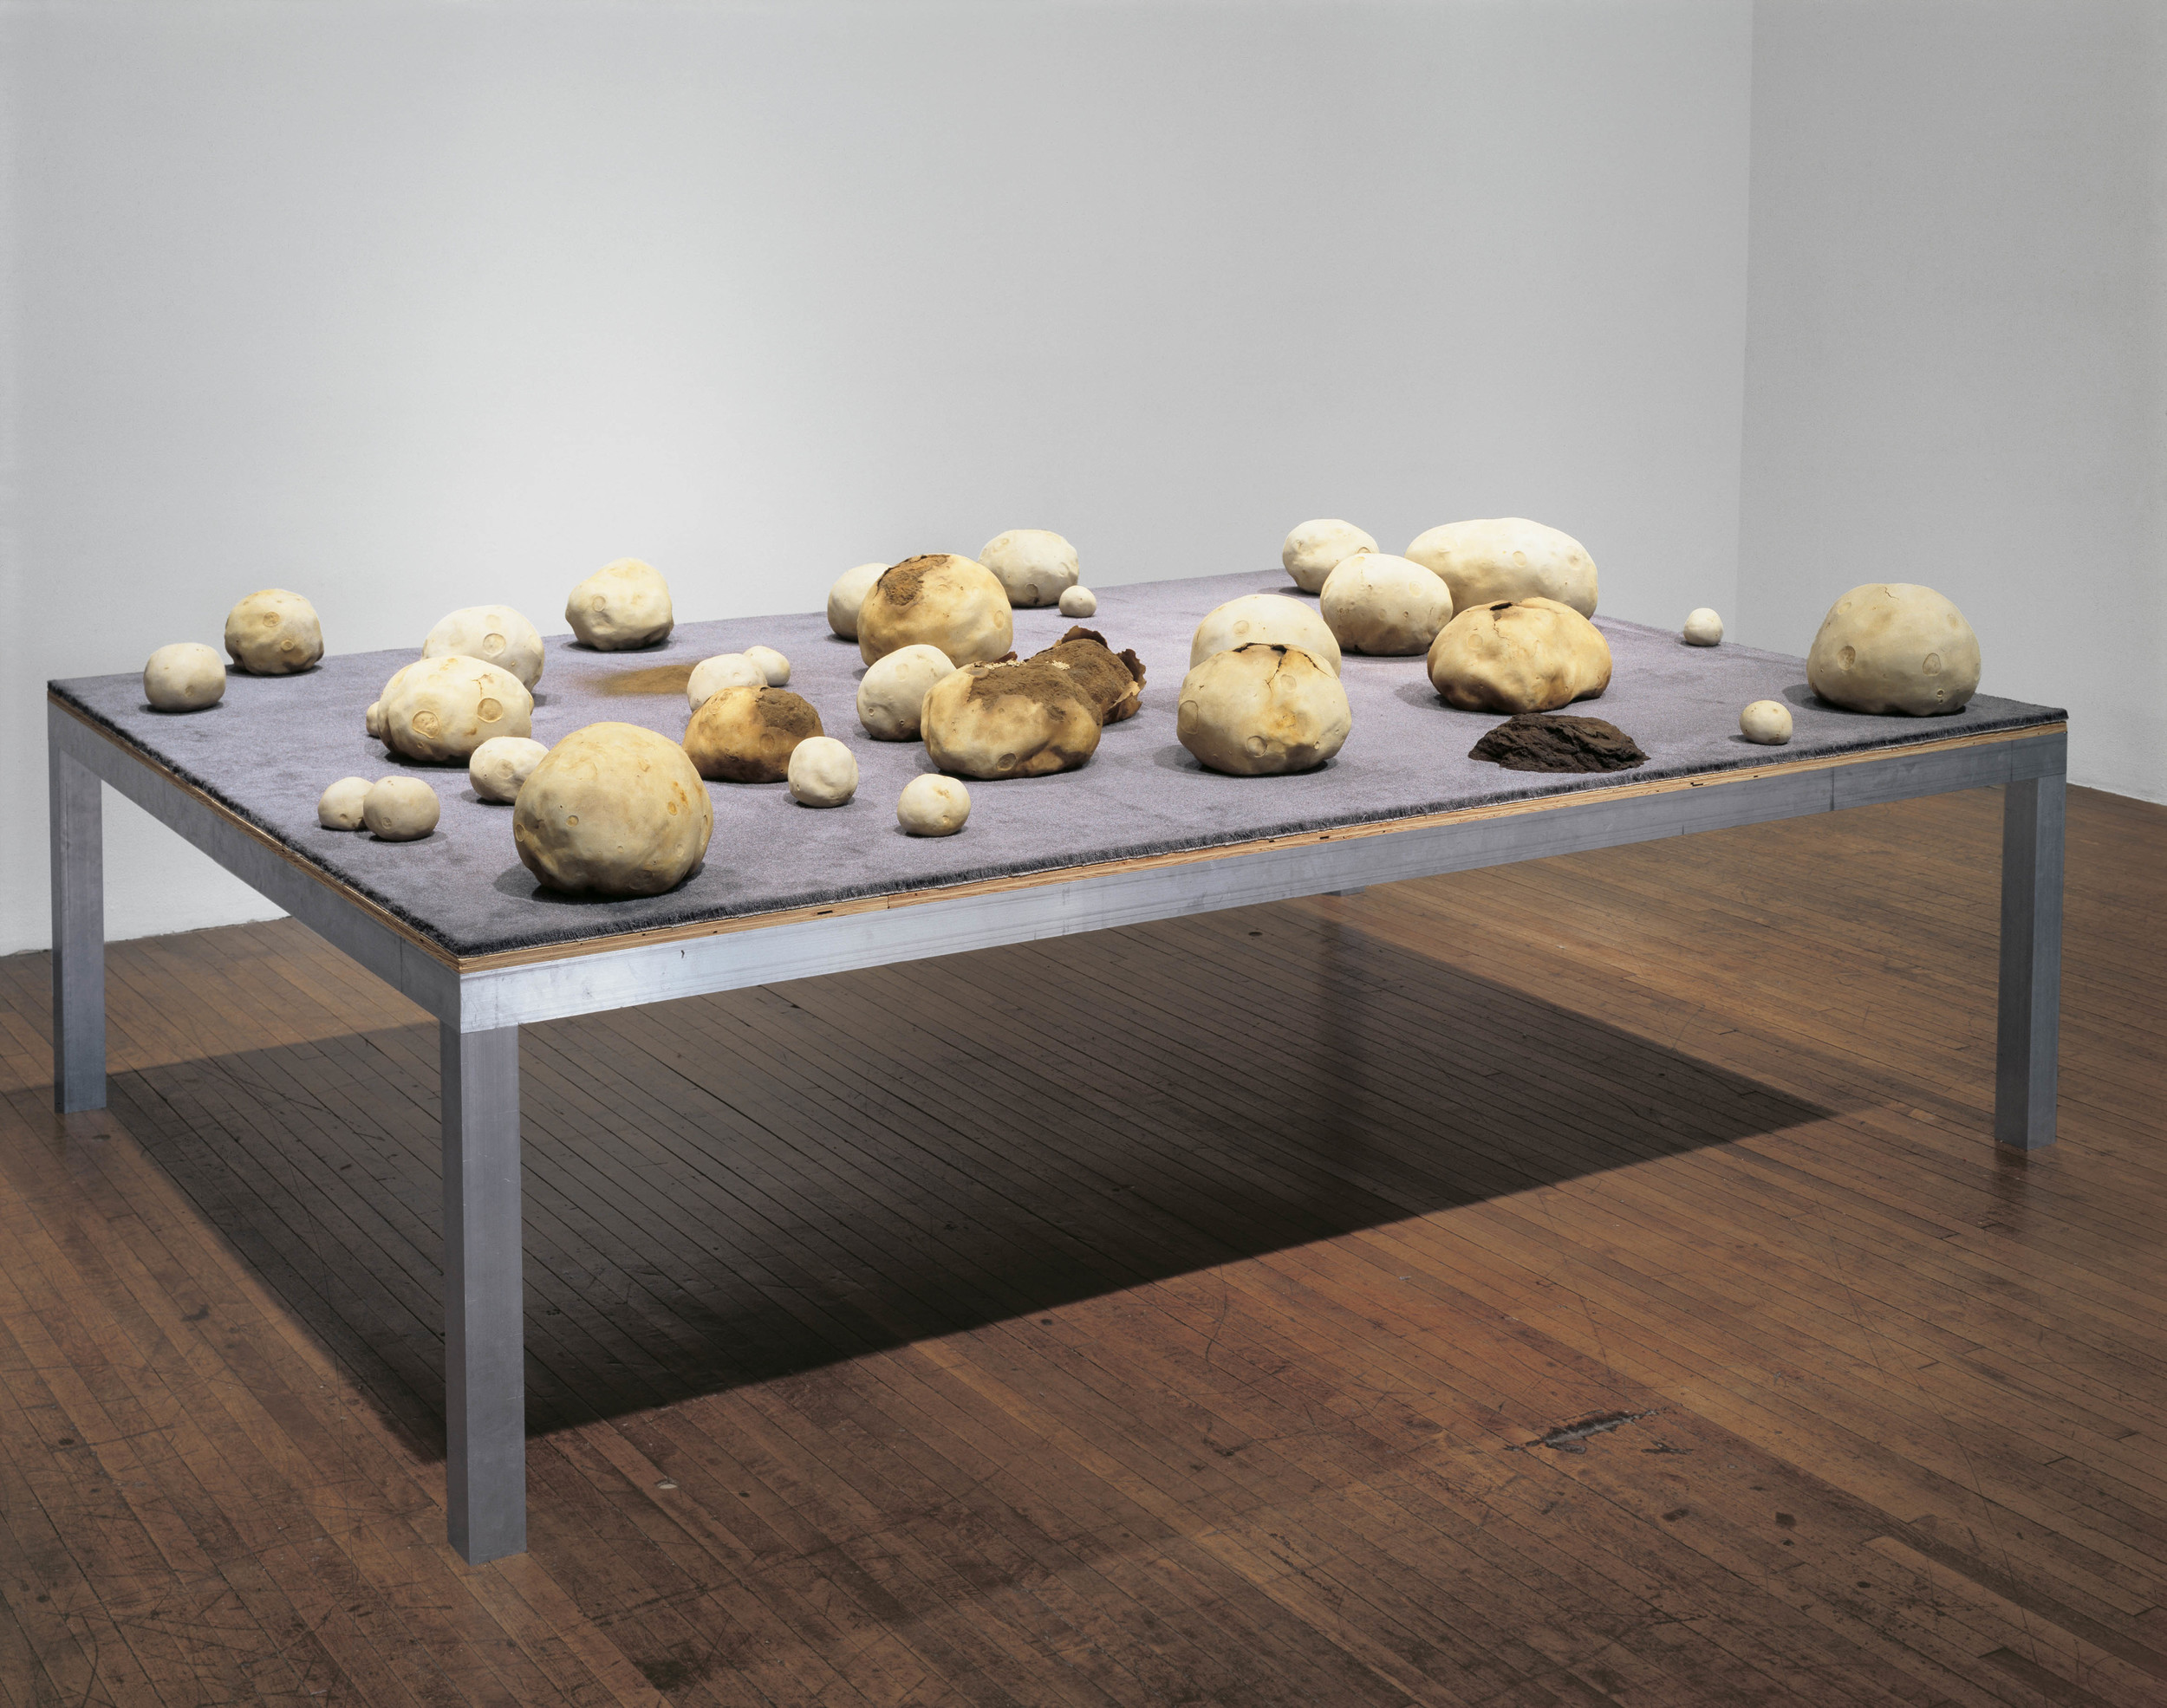  Puffball Field, 1998, Aluminum, carpet, pigment, polymer, oil and lacquer, and wood, 40 x 120 x 84 inches 